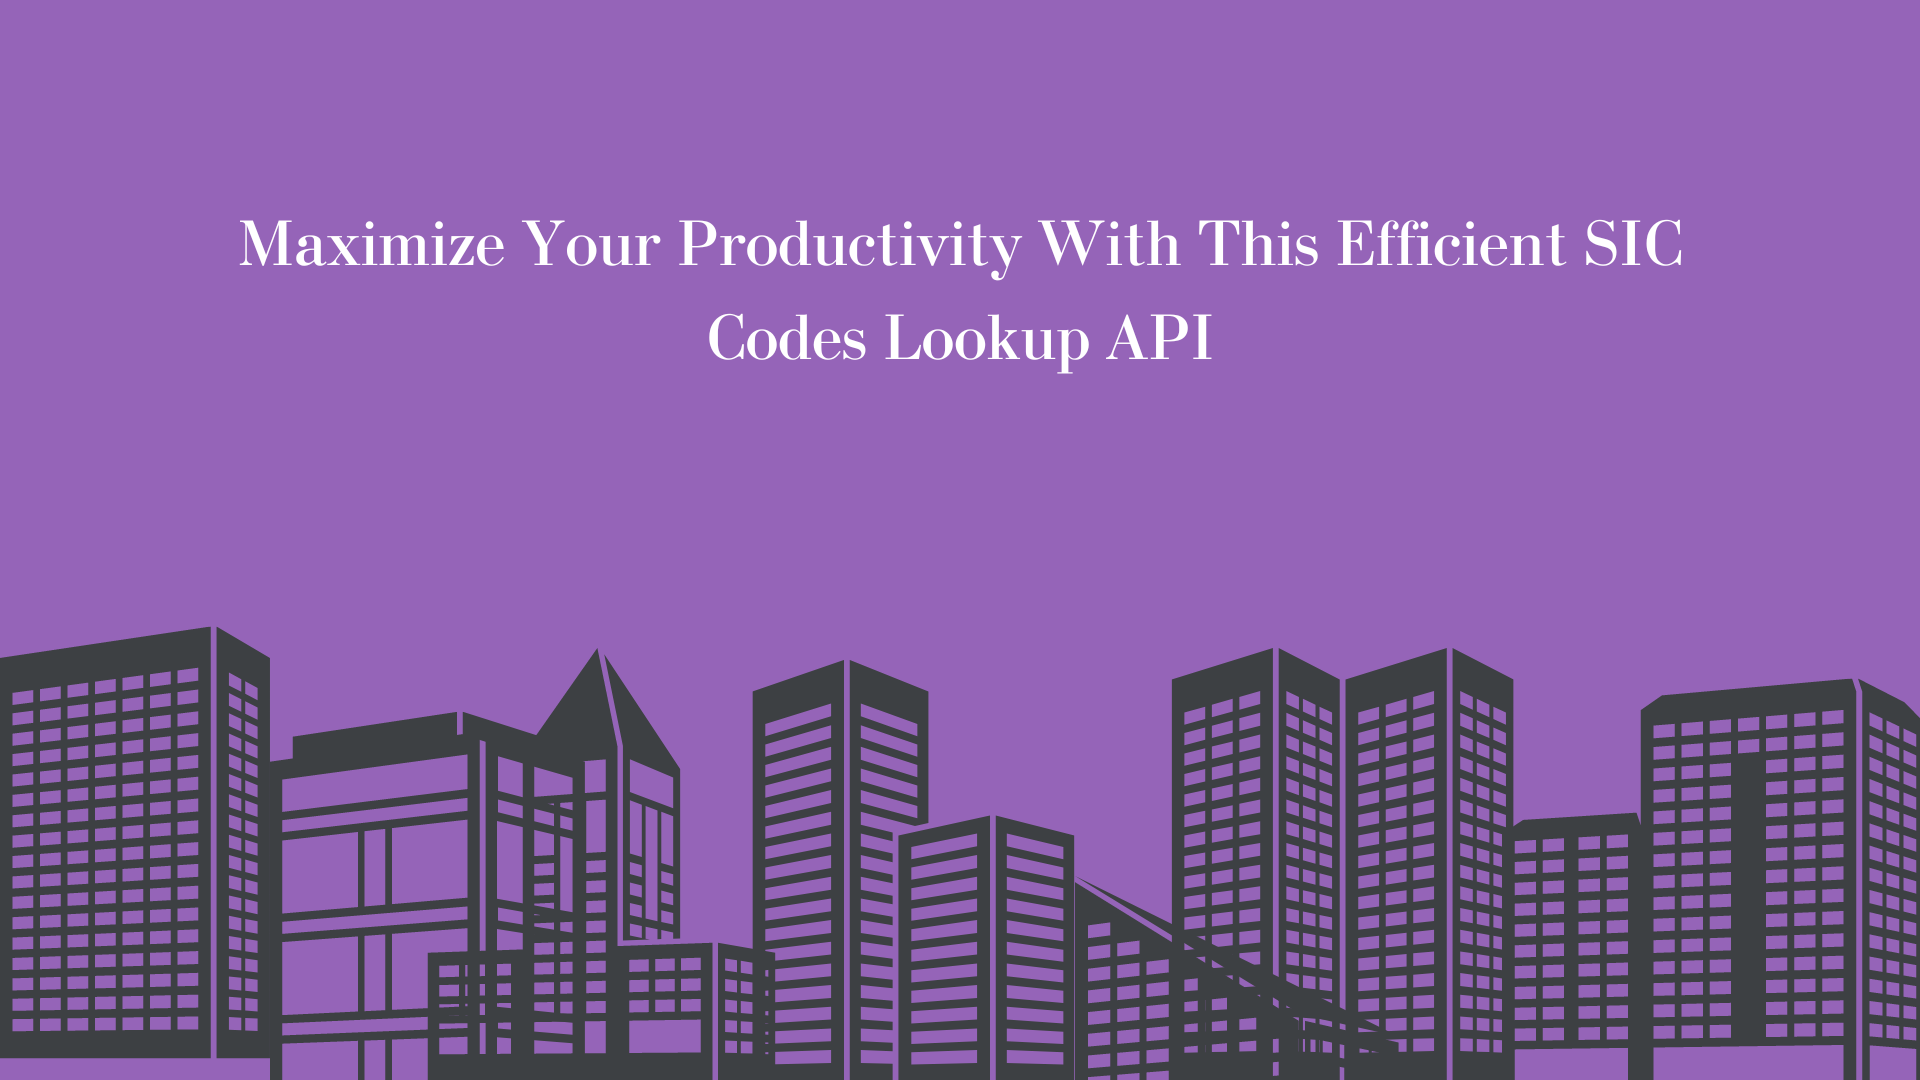 Maximize Your Productivity With This Efficient SIC Codes Lookup API